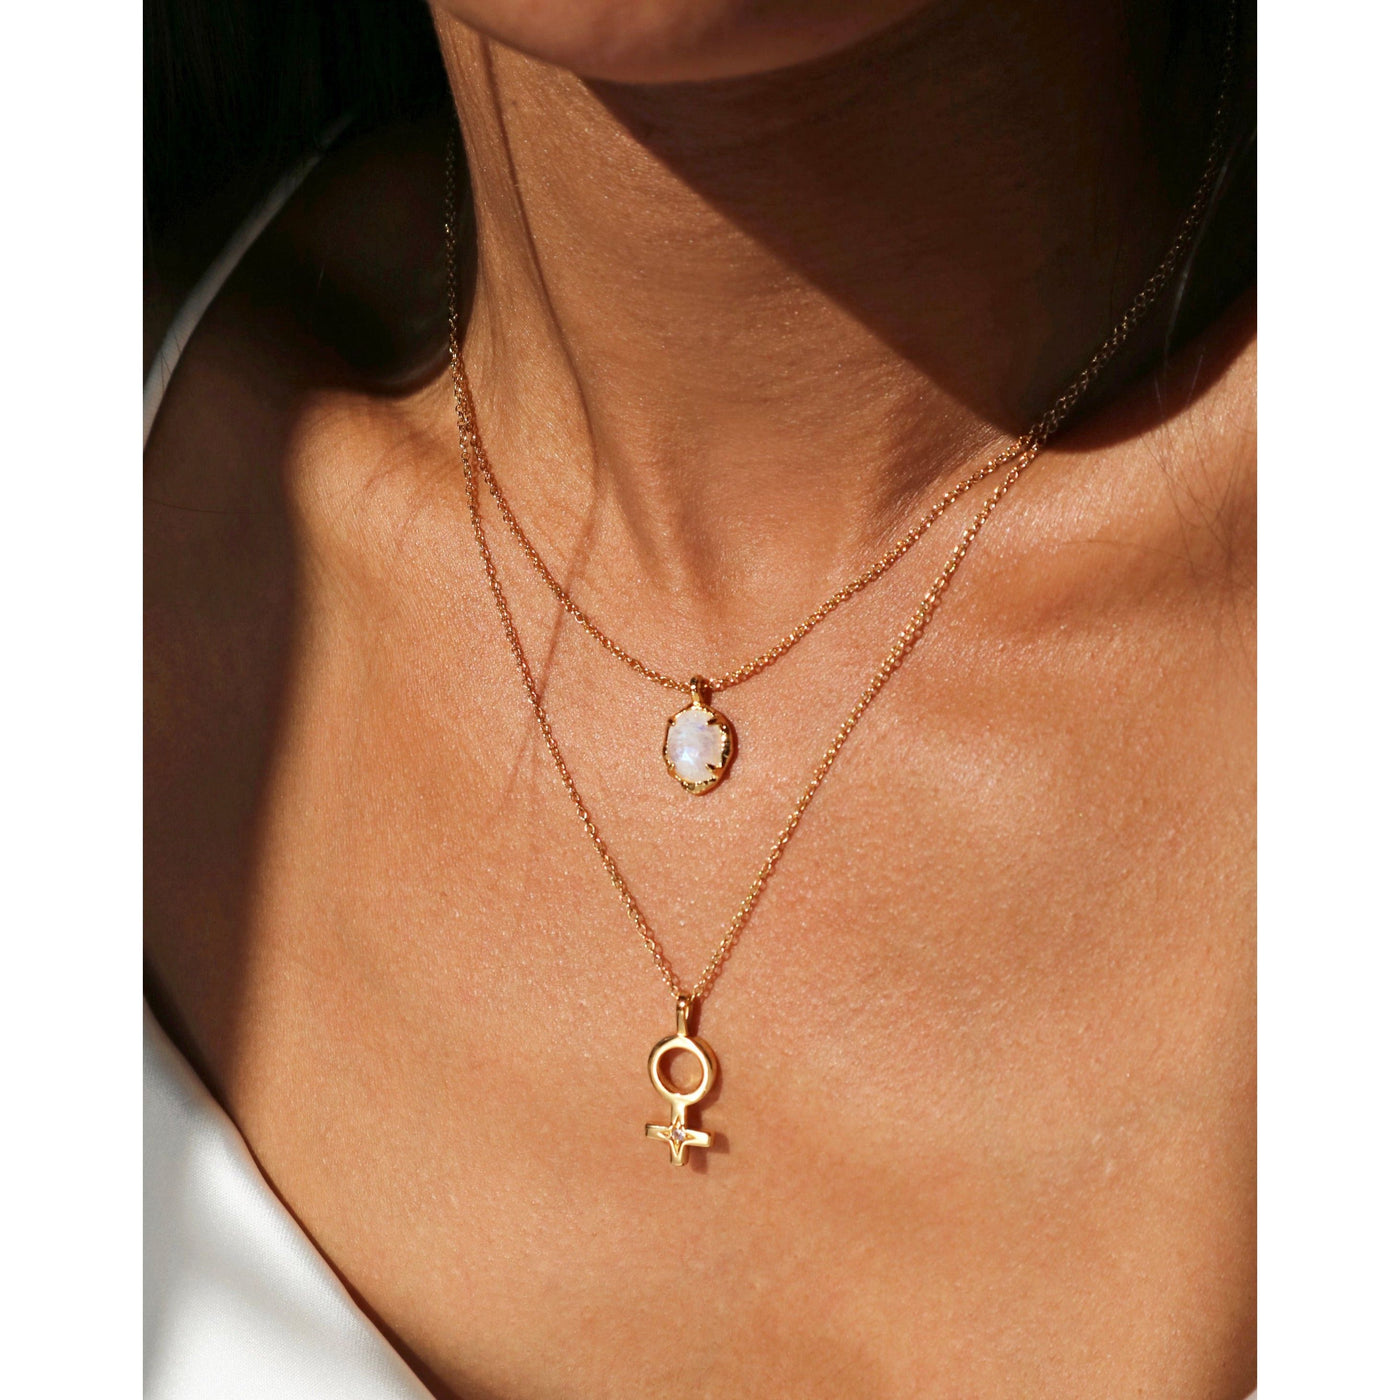 moonstone gold pendant necklace layered with female symbol necklace, Rani and co jewellery